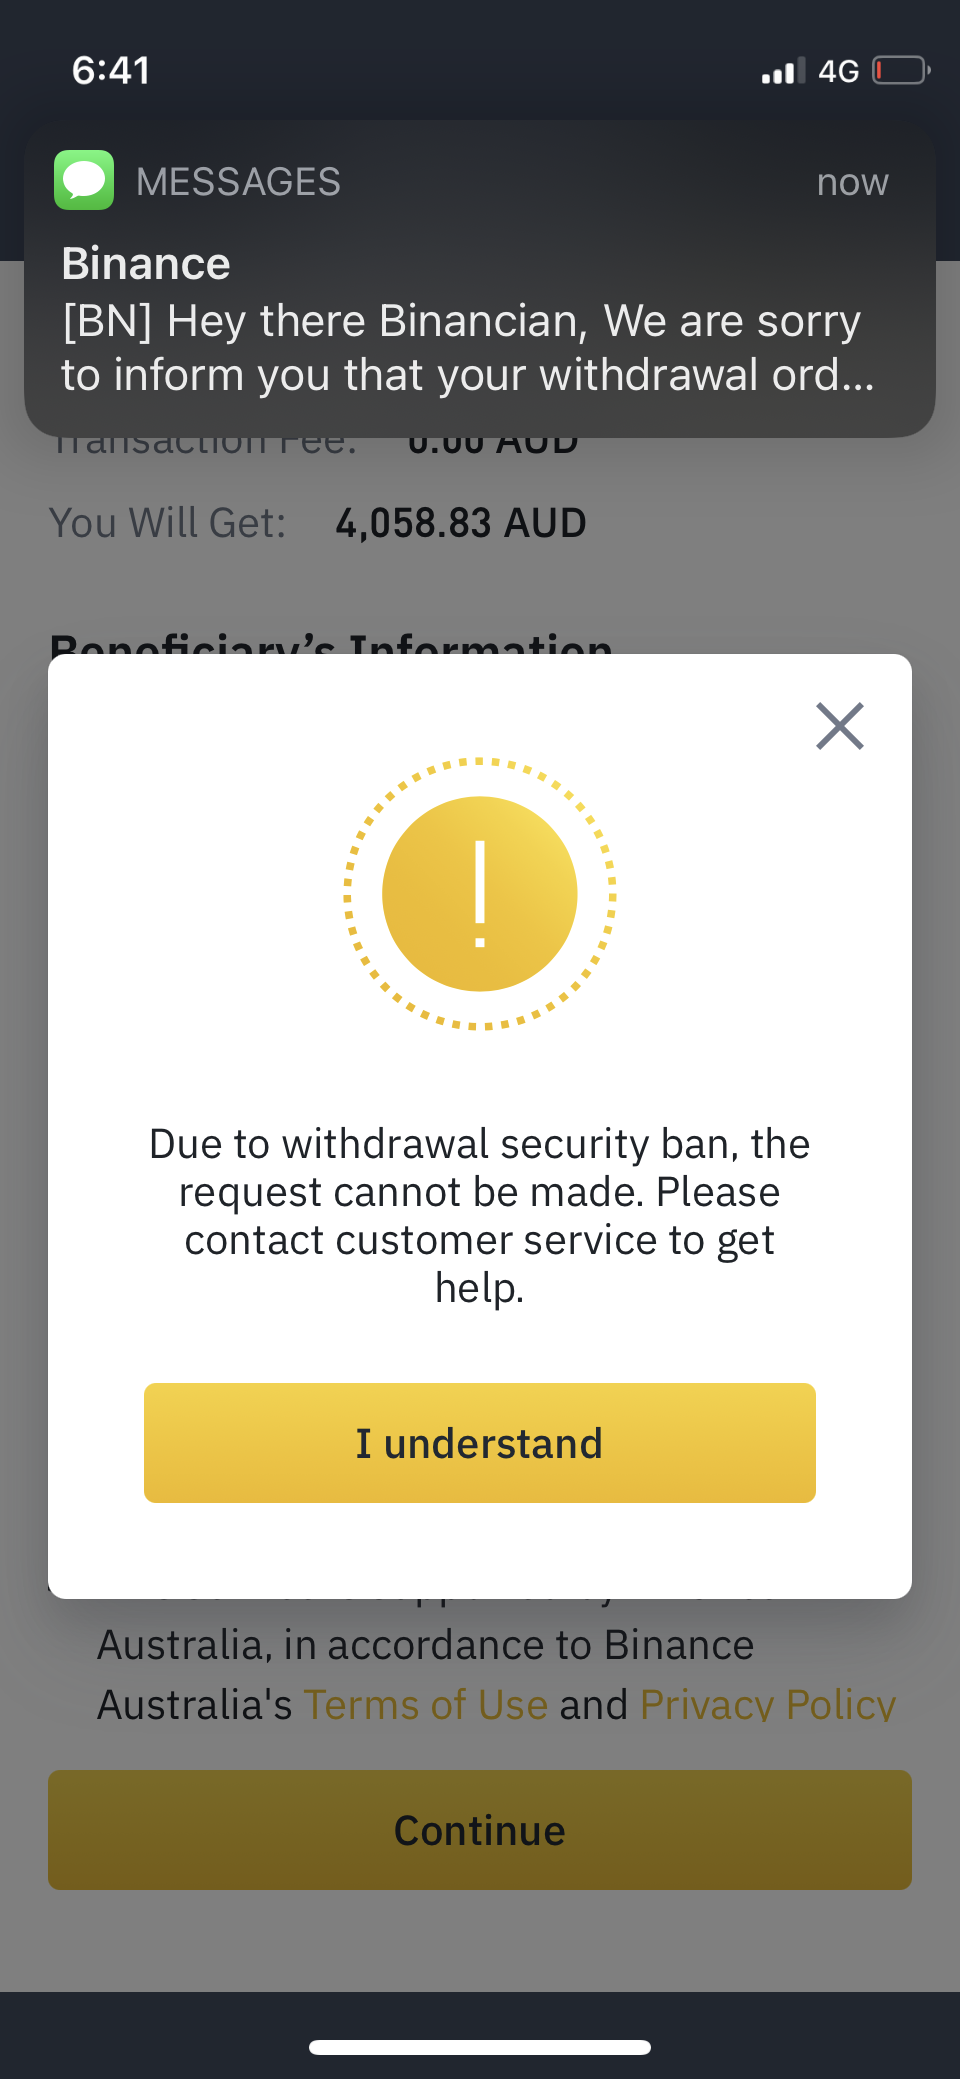 Binance complaint They won’t release my funds so I can withdraw or transfer